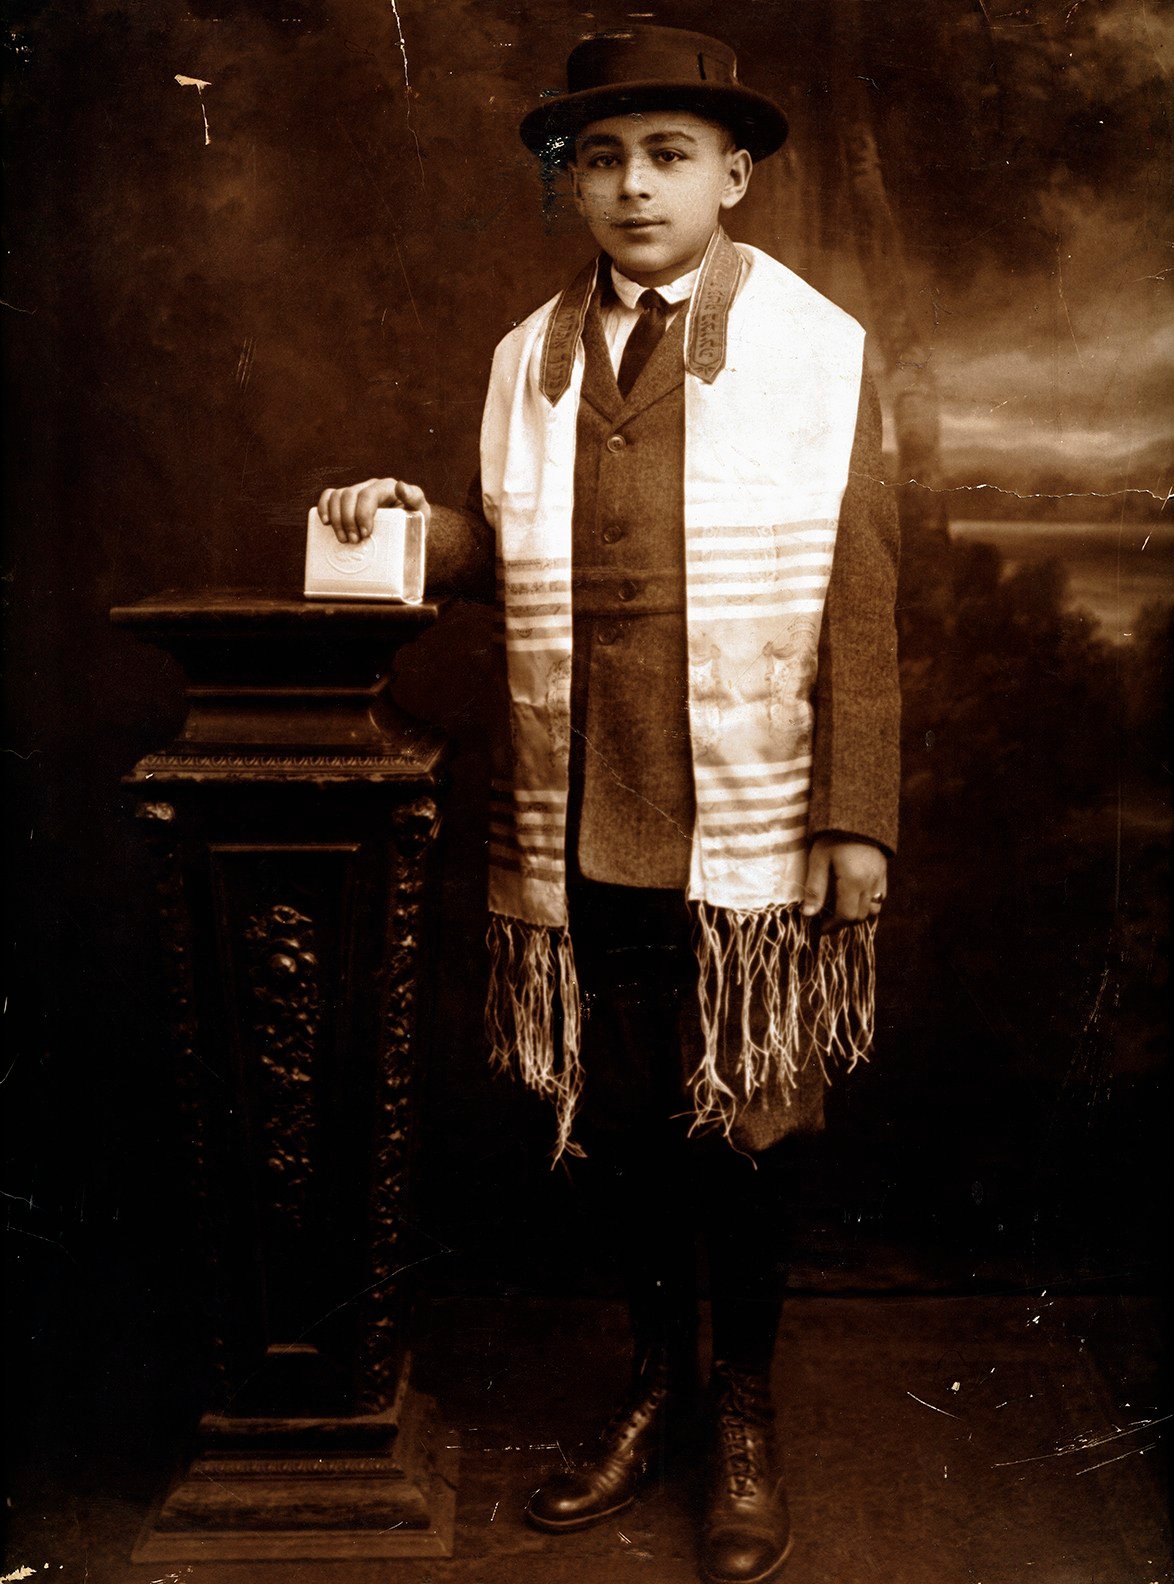 Portrait of a young Max Marcus, a 97 Orchard resident, dressed in formal attire for his Bar Mitzvah